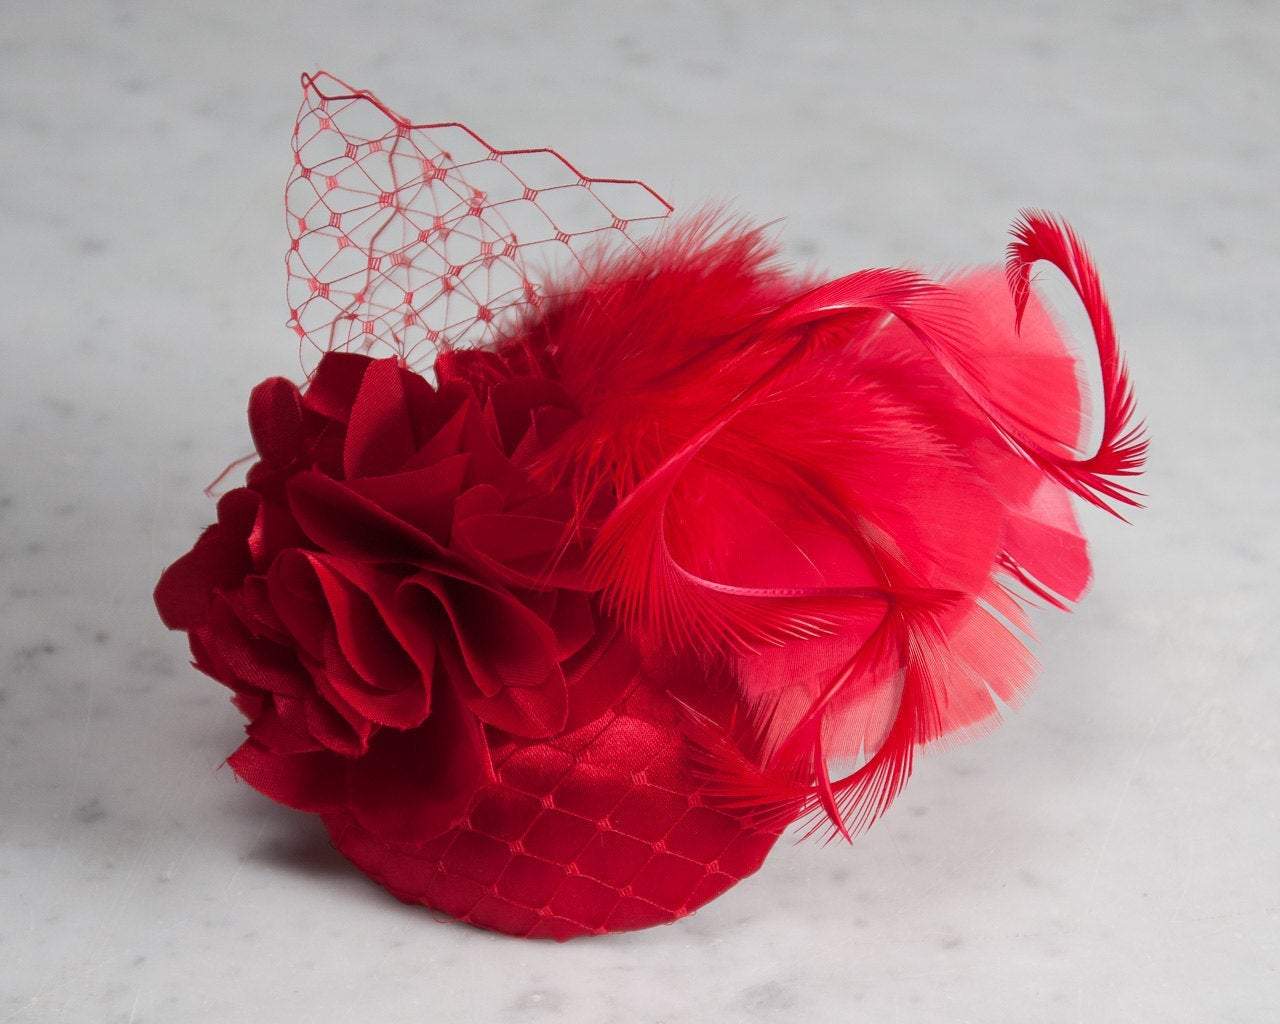 FASCINATOR - AIRY ELEGANCE IN TREND COLOR CANTALOUPE © Seegang Berlin